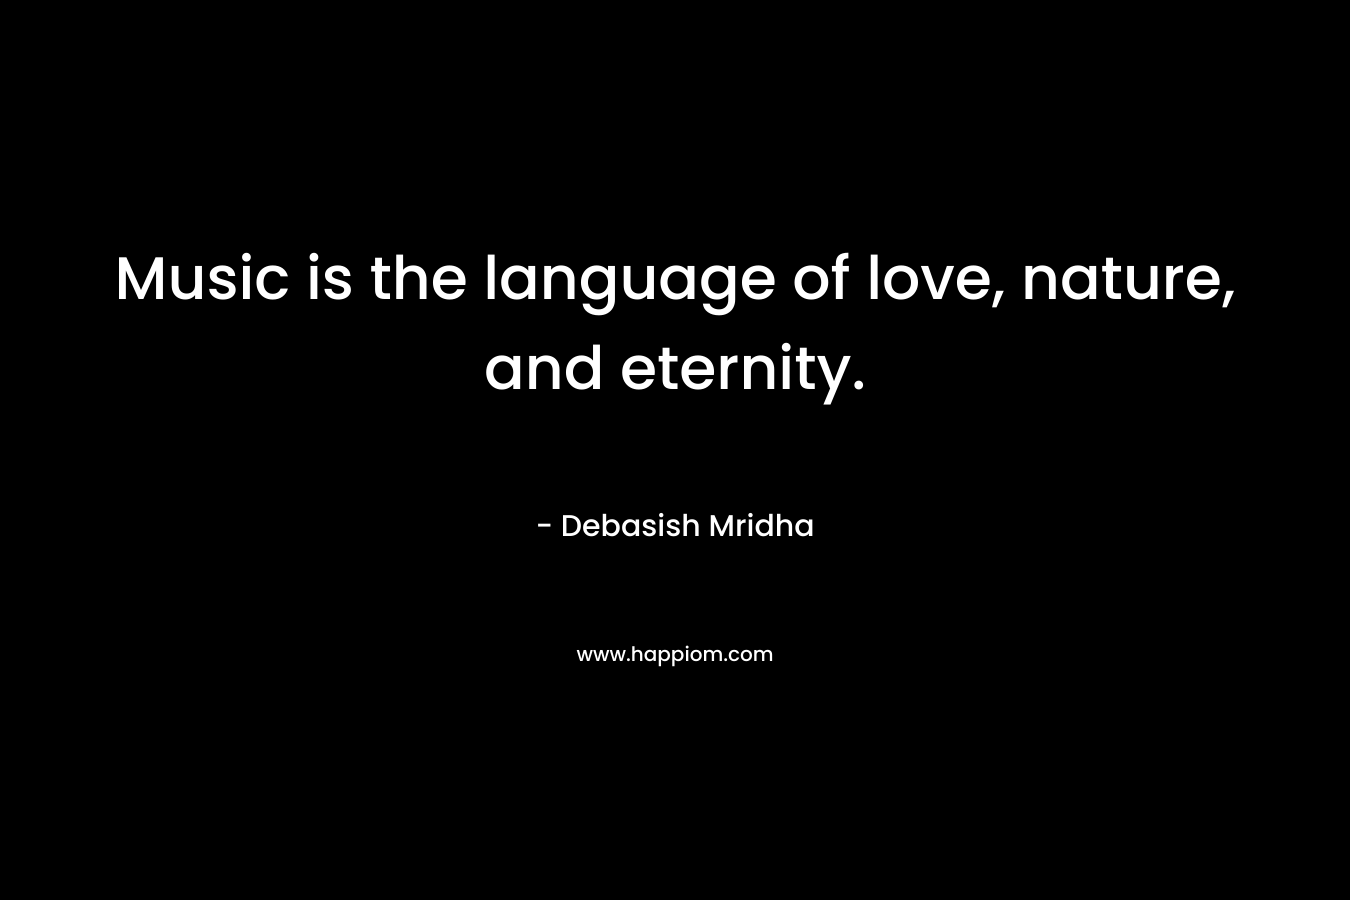 Music is the language of love, nature, and eternity.